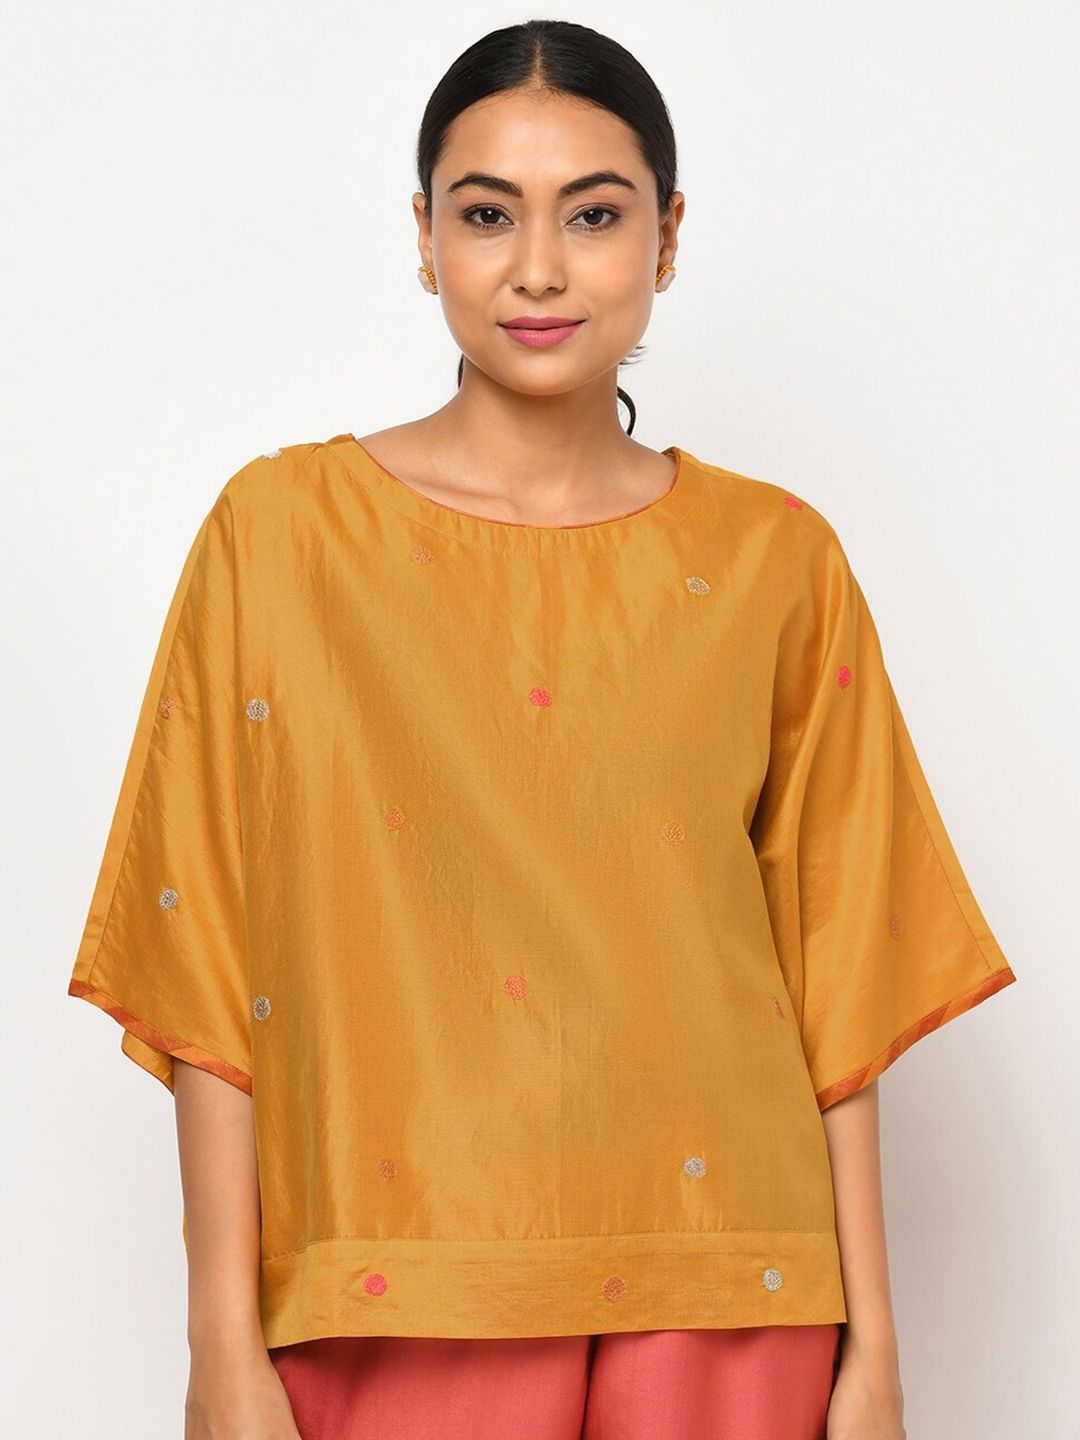 Fabindia Mustard Yellow & Silver-Toned Extended Sleeves A-Line Top Price in India